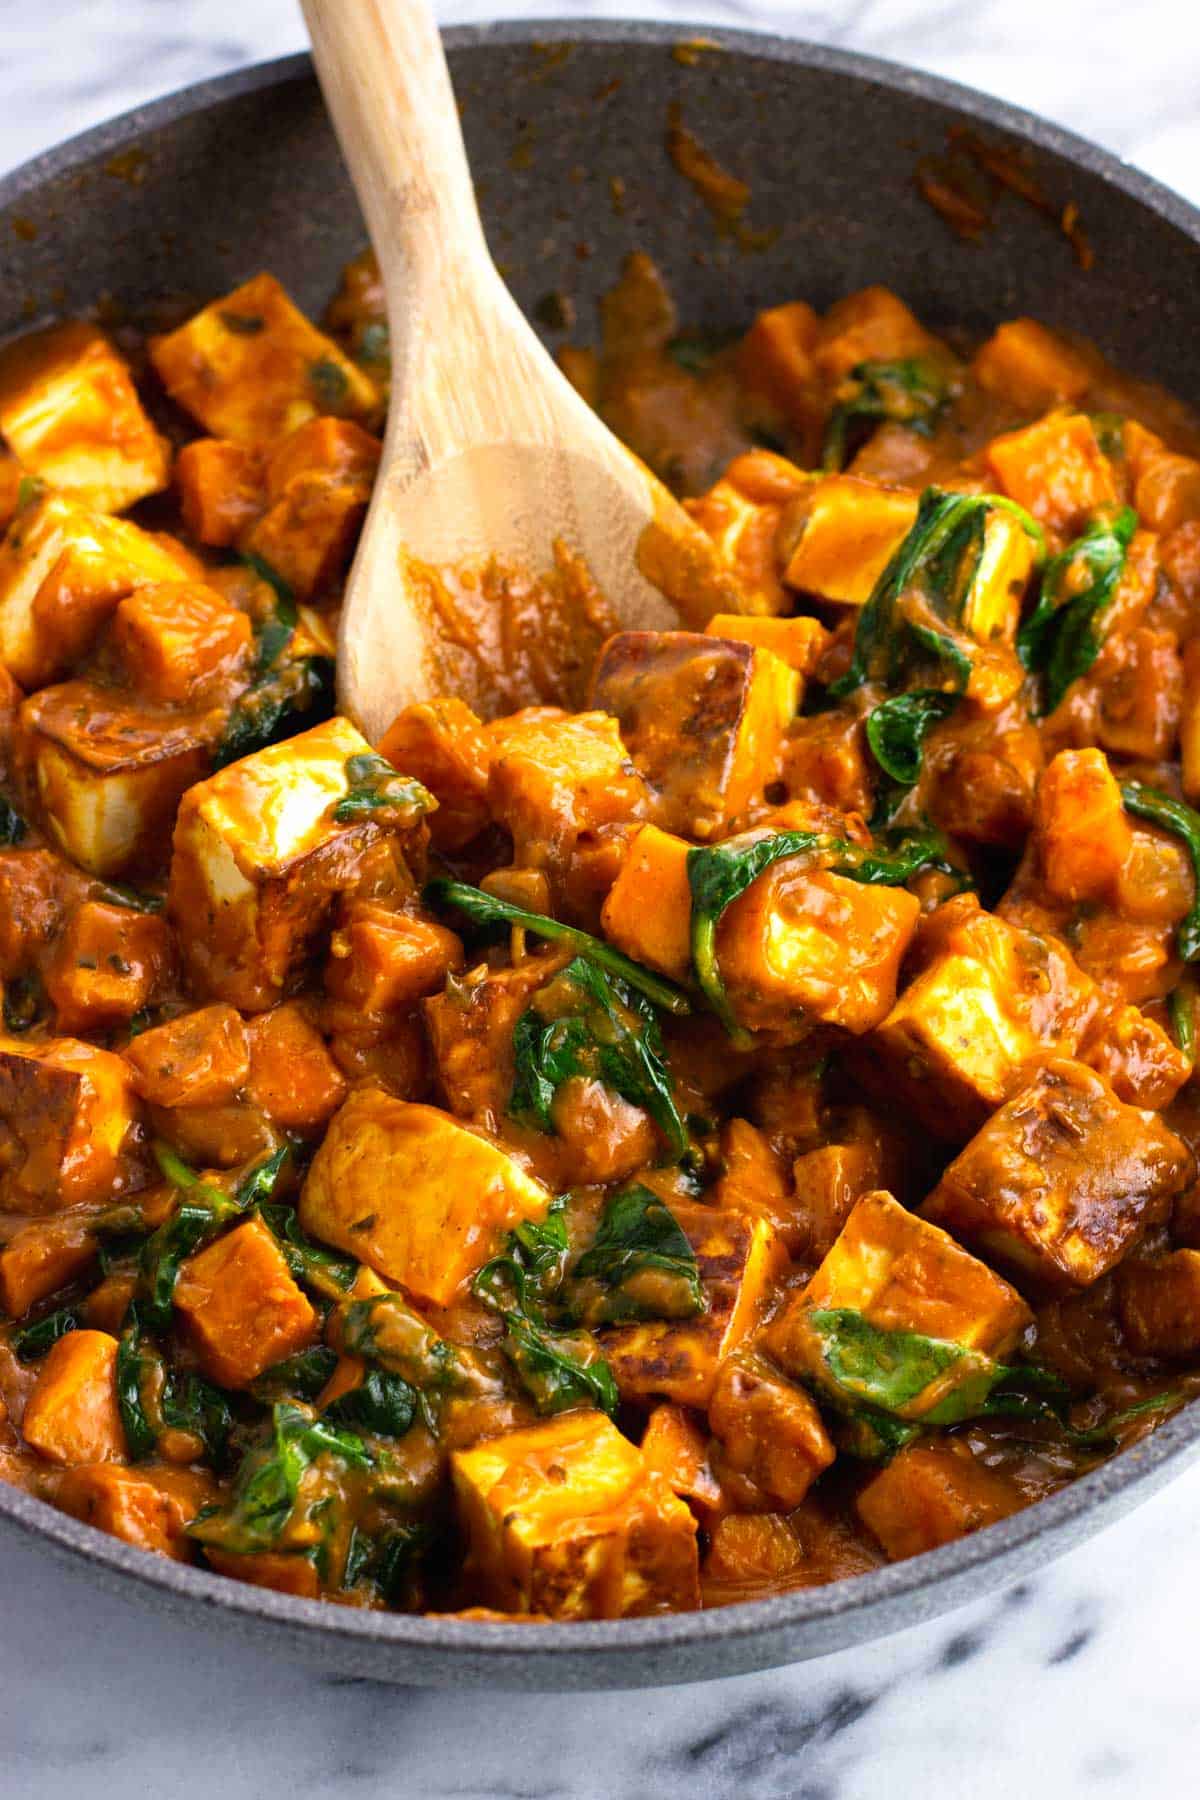 A skillet of paneer cubes, spinach, and sweet potatoes in simmer sauce.